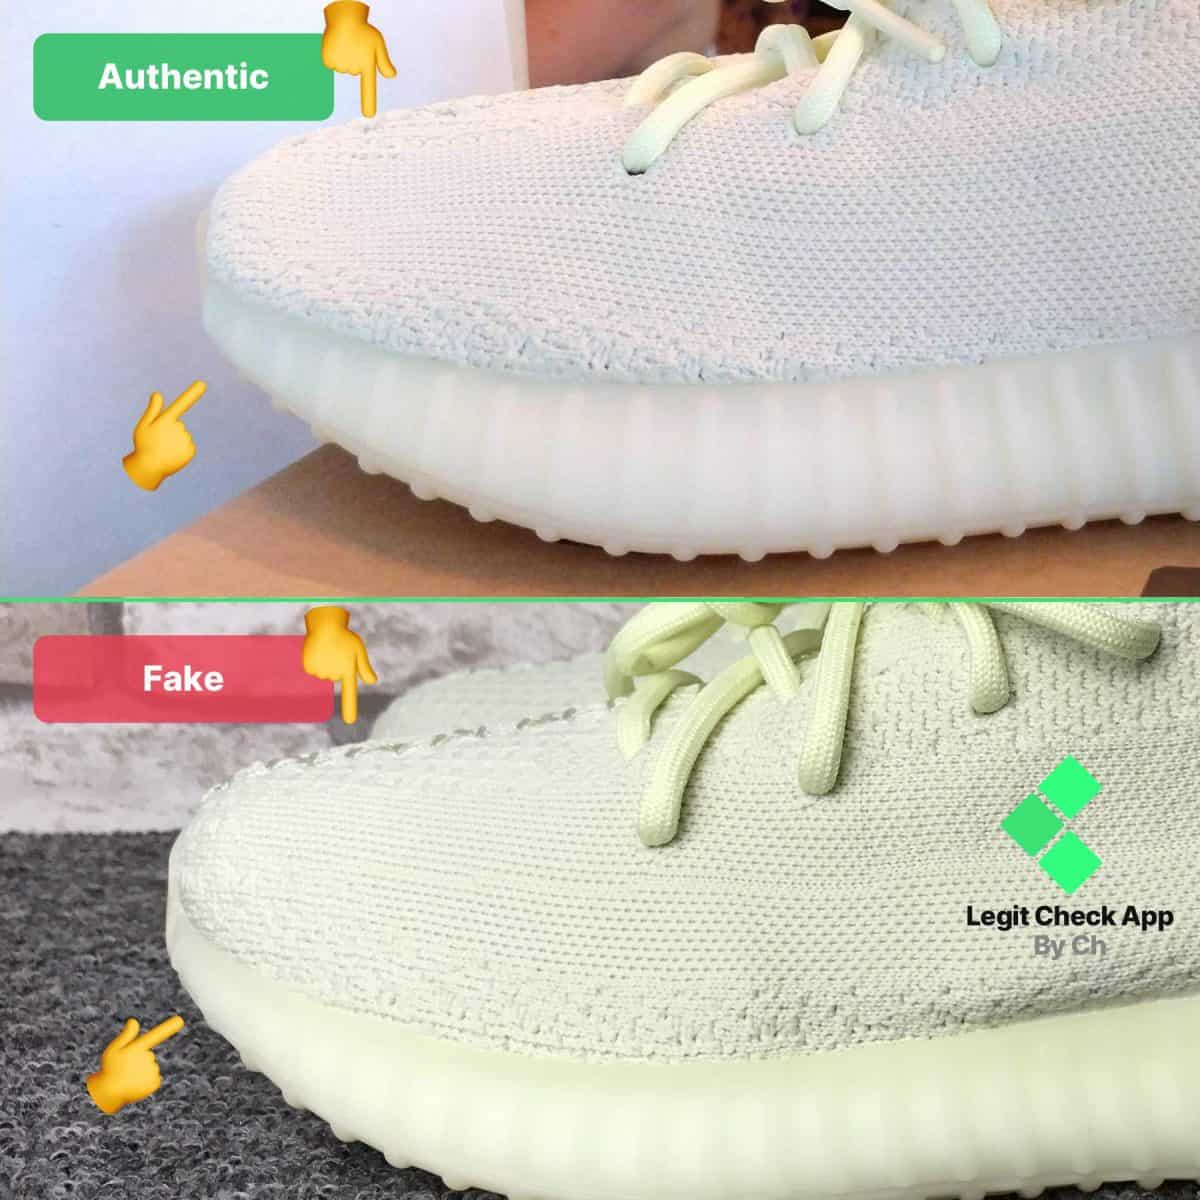 The Ultimate Real Vs Fake Yeezy Butter Comparison Legit Check App